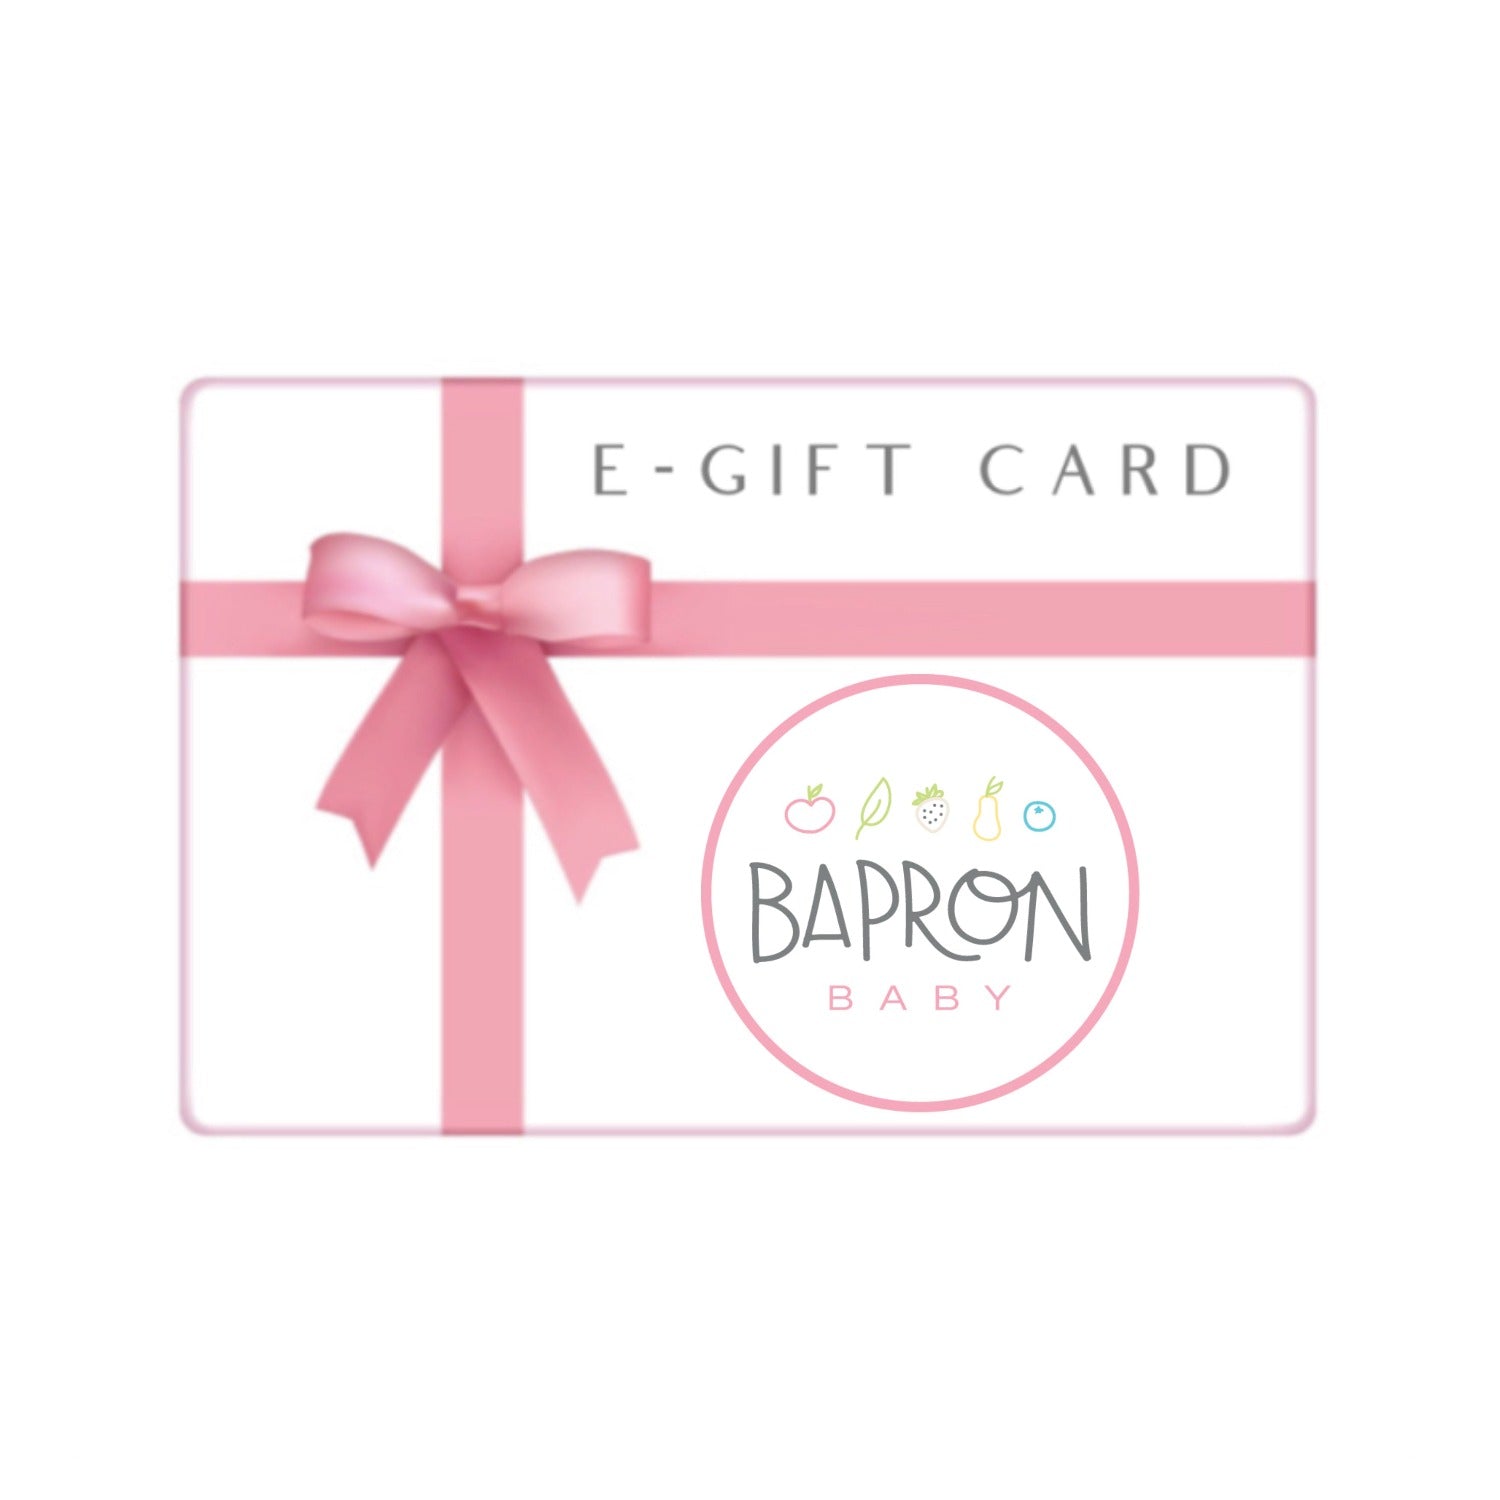 New Mom Gift, Pregnancy Gift Ideas | ZoLi Giftcards